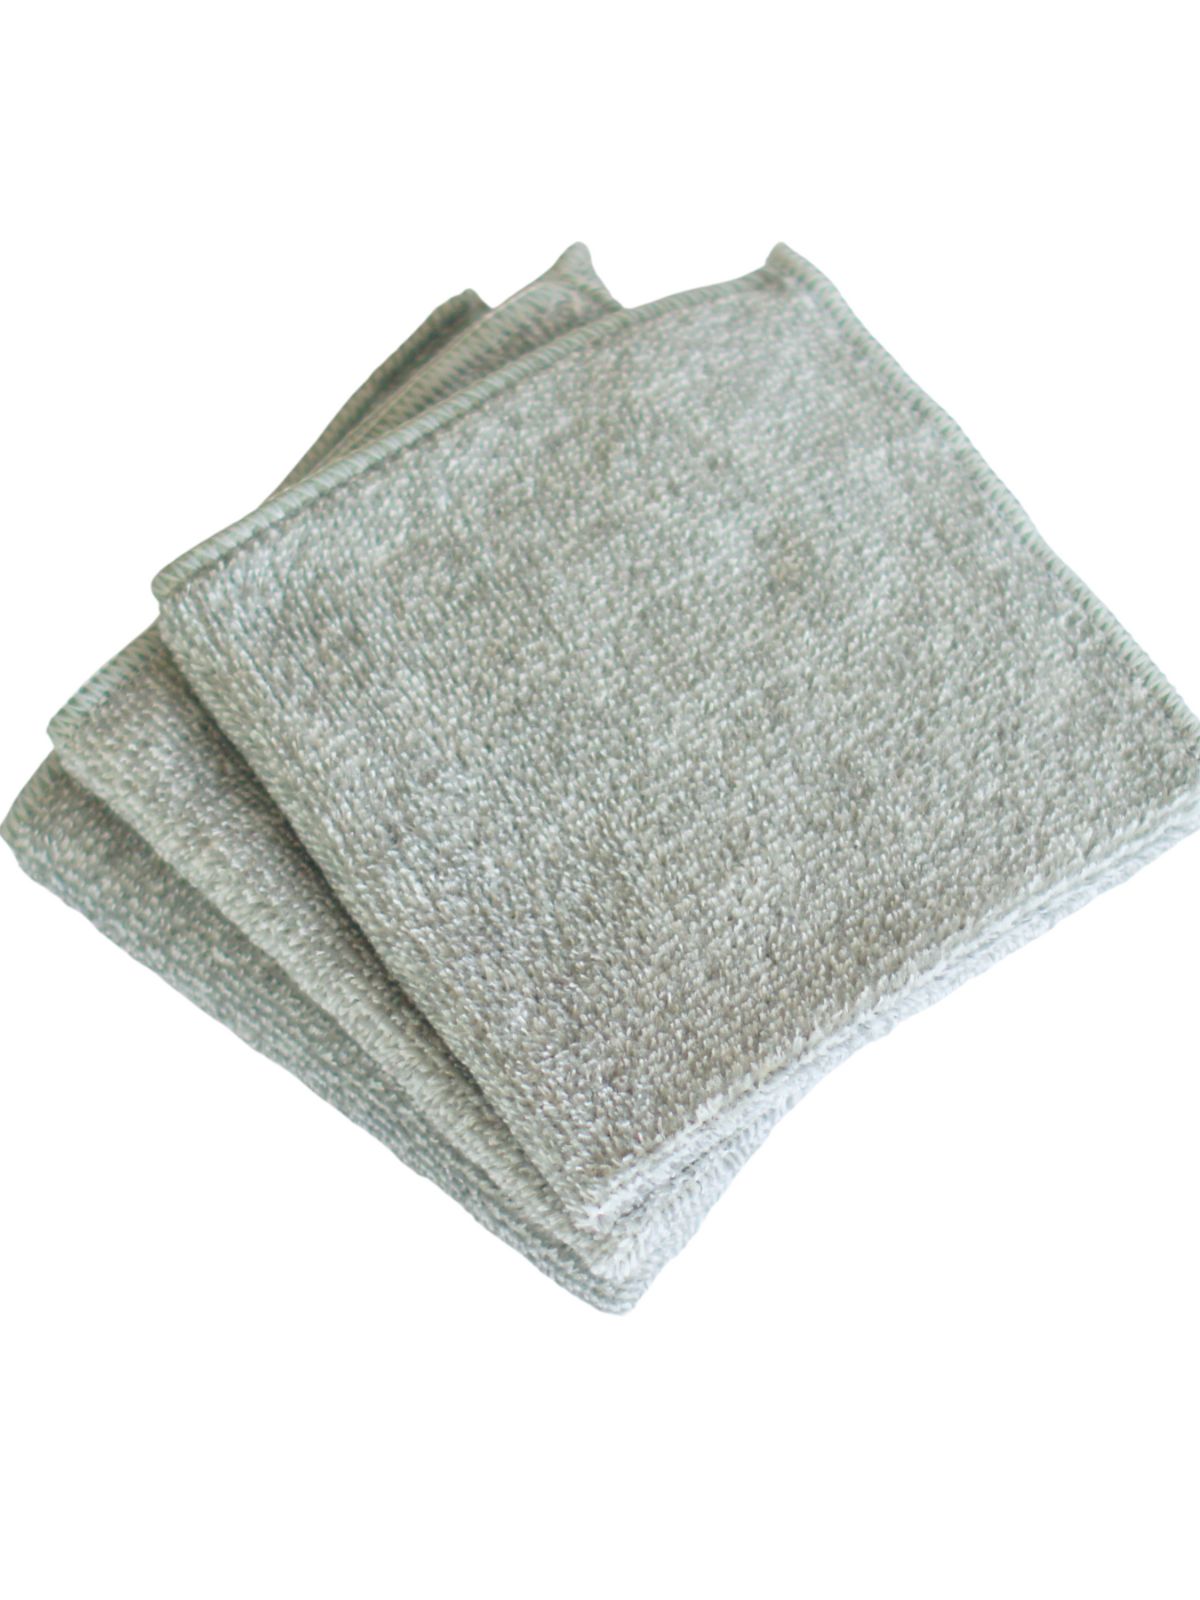 Microfiber cloth for the care and maintenance of jute ropes, grey, 28x28cm, lint-free